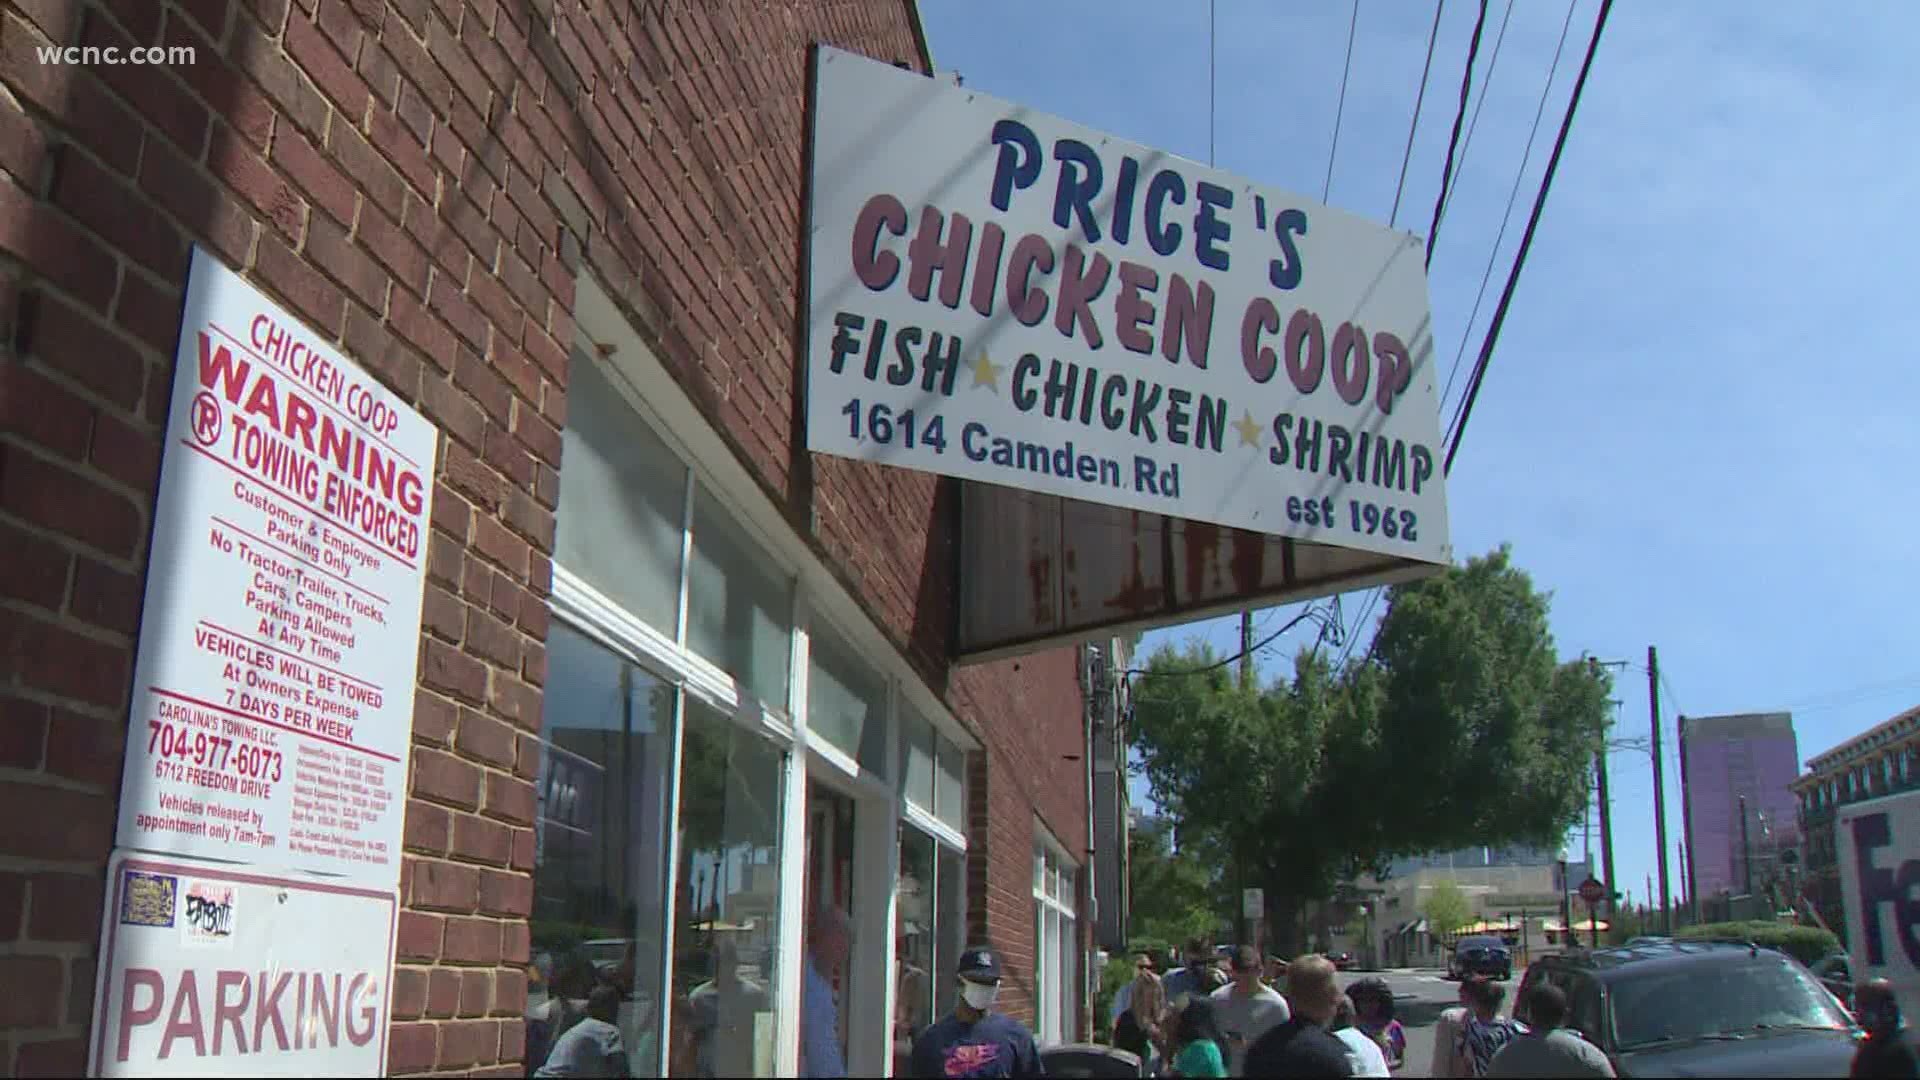 Charlotte's iconic fried chicken restaurant Price's Chicken Coop will be closing its doors for good on June 19.